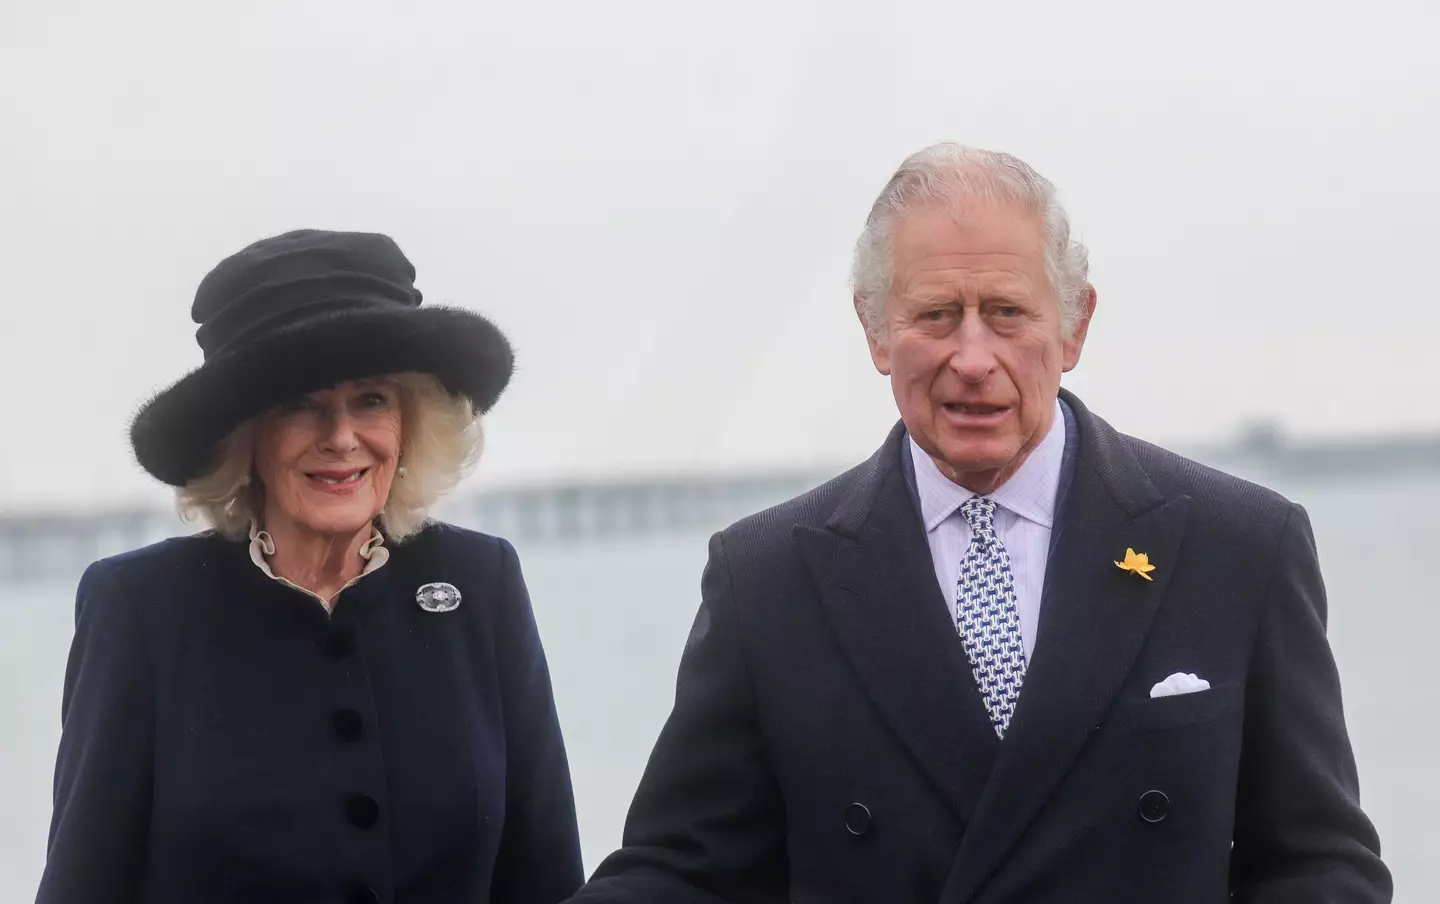 King Charles' wife Camilla is now the Queen Consort.